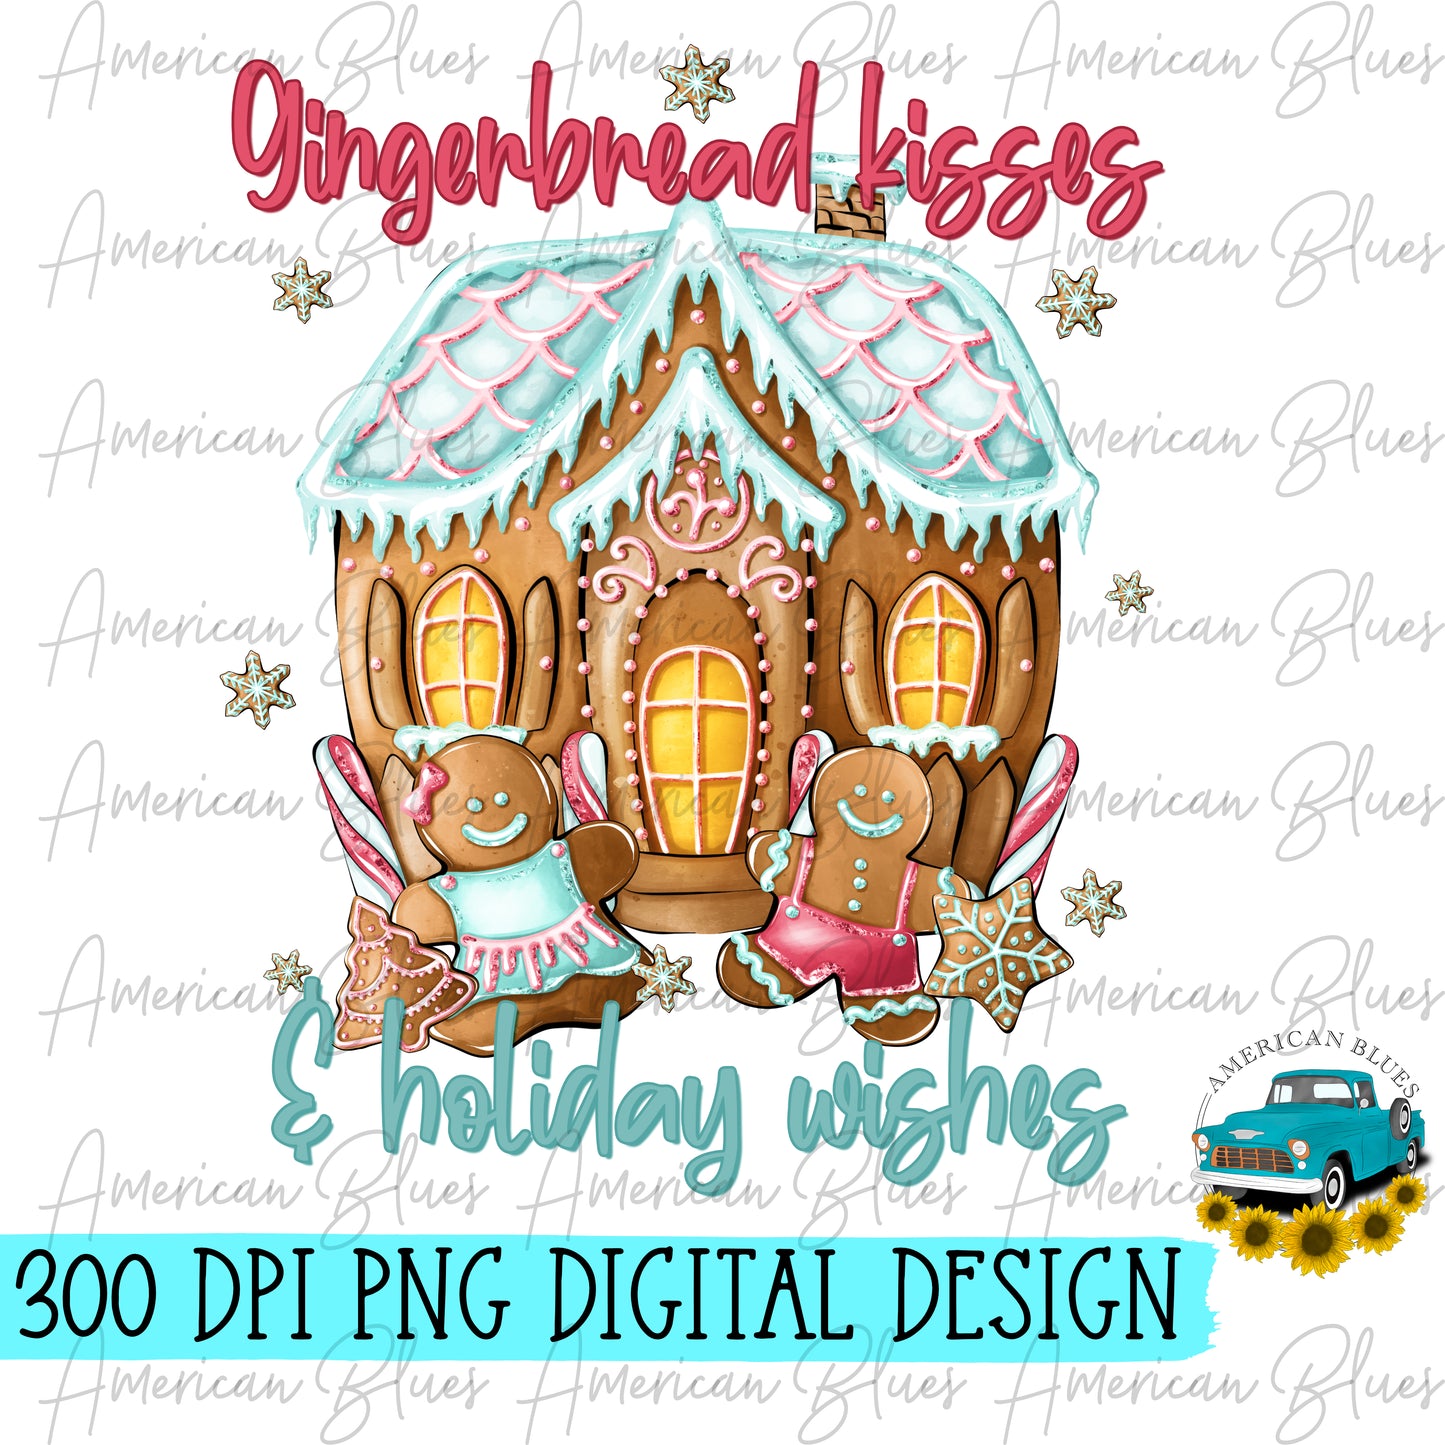 Gingerbread kisses & holiday wishes